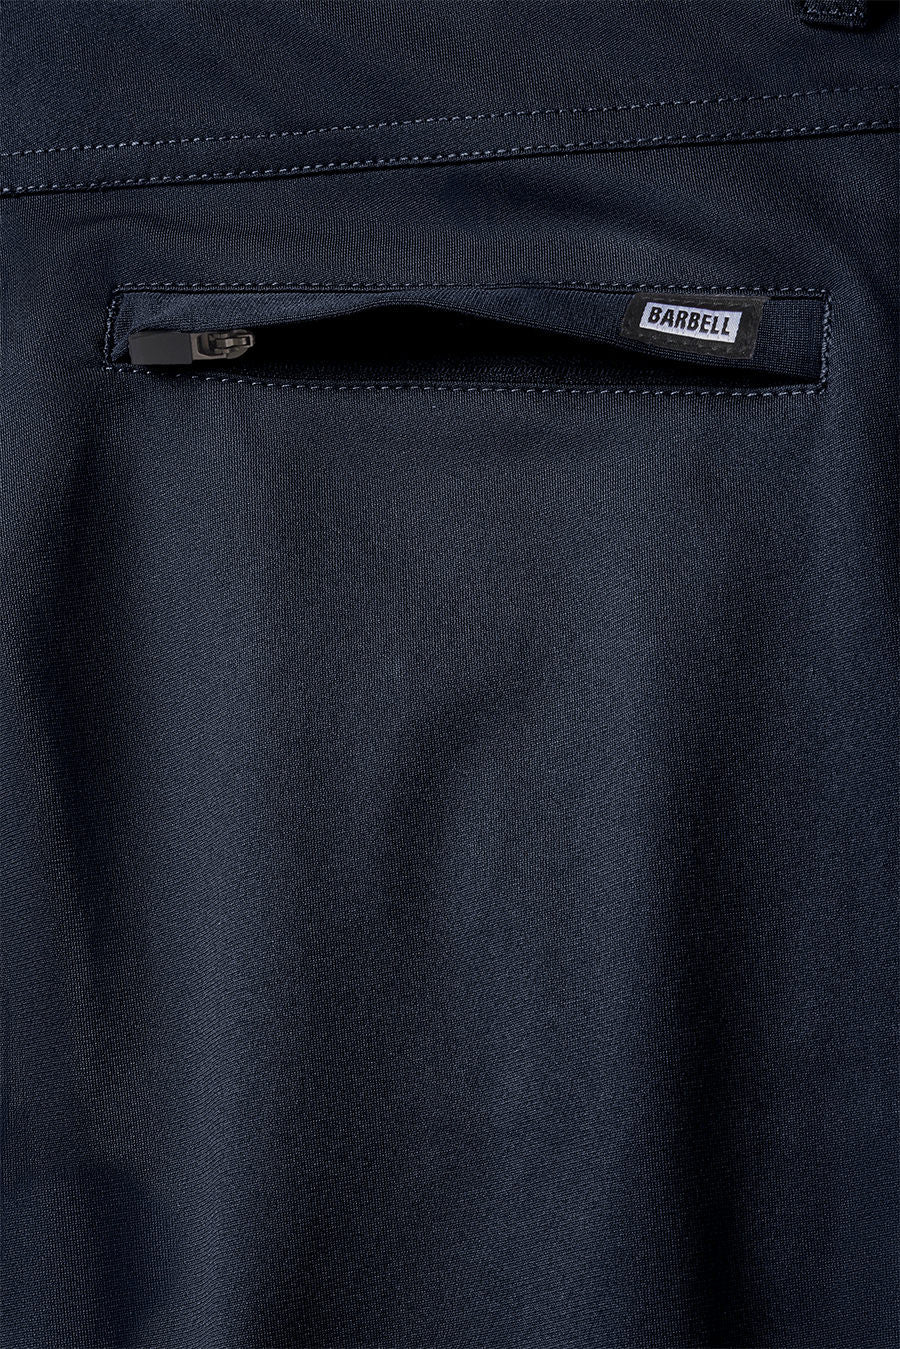 Anything Dress Pant - Navy - photo from front button detail #color_navy